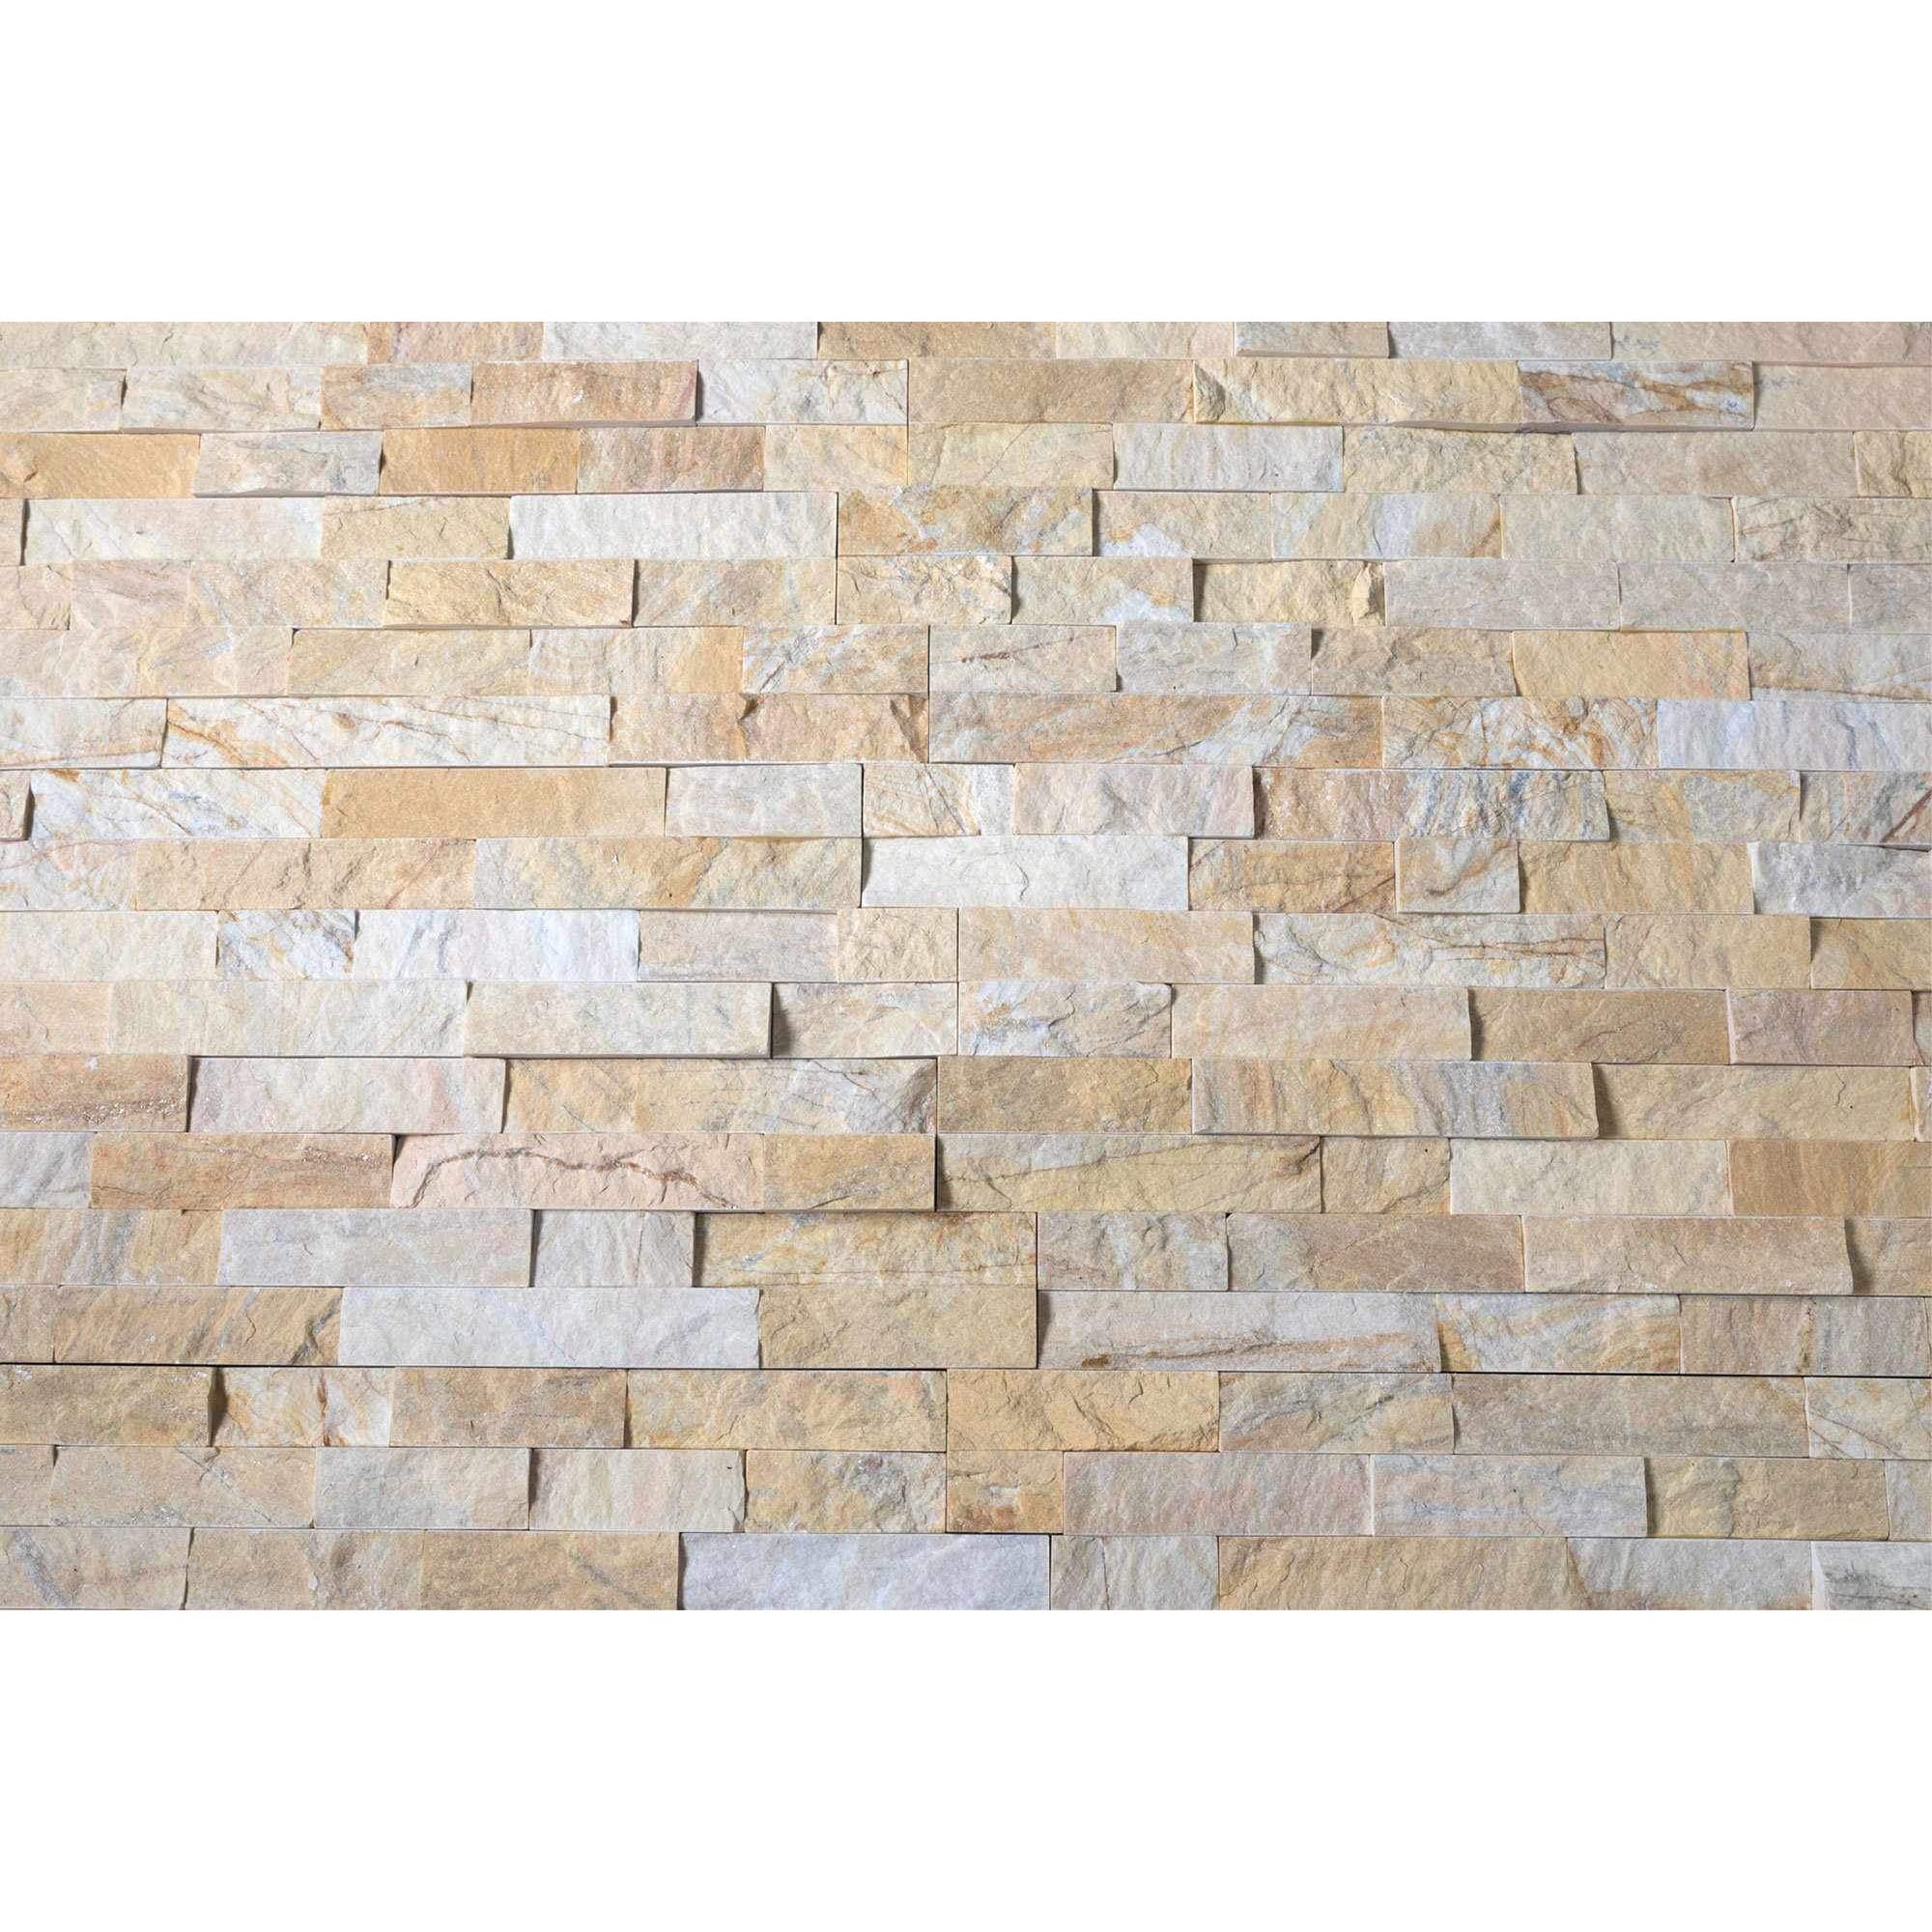 SAMPLE - Natural Stacked Stone Wall Cladding Panels - Miami Sands